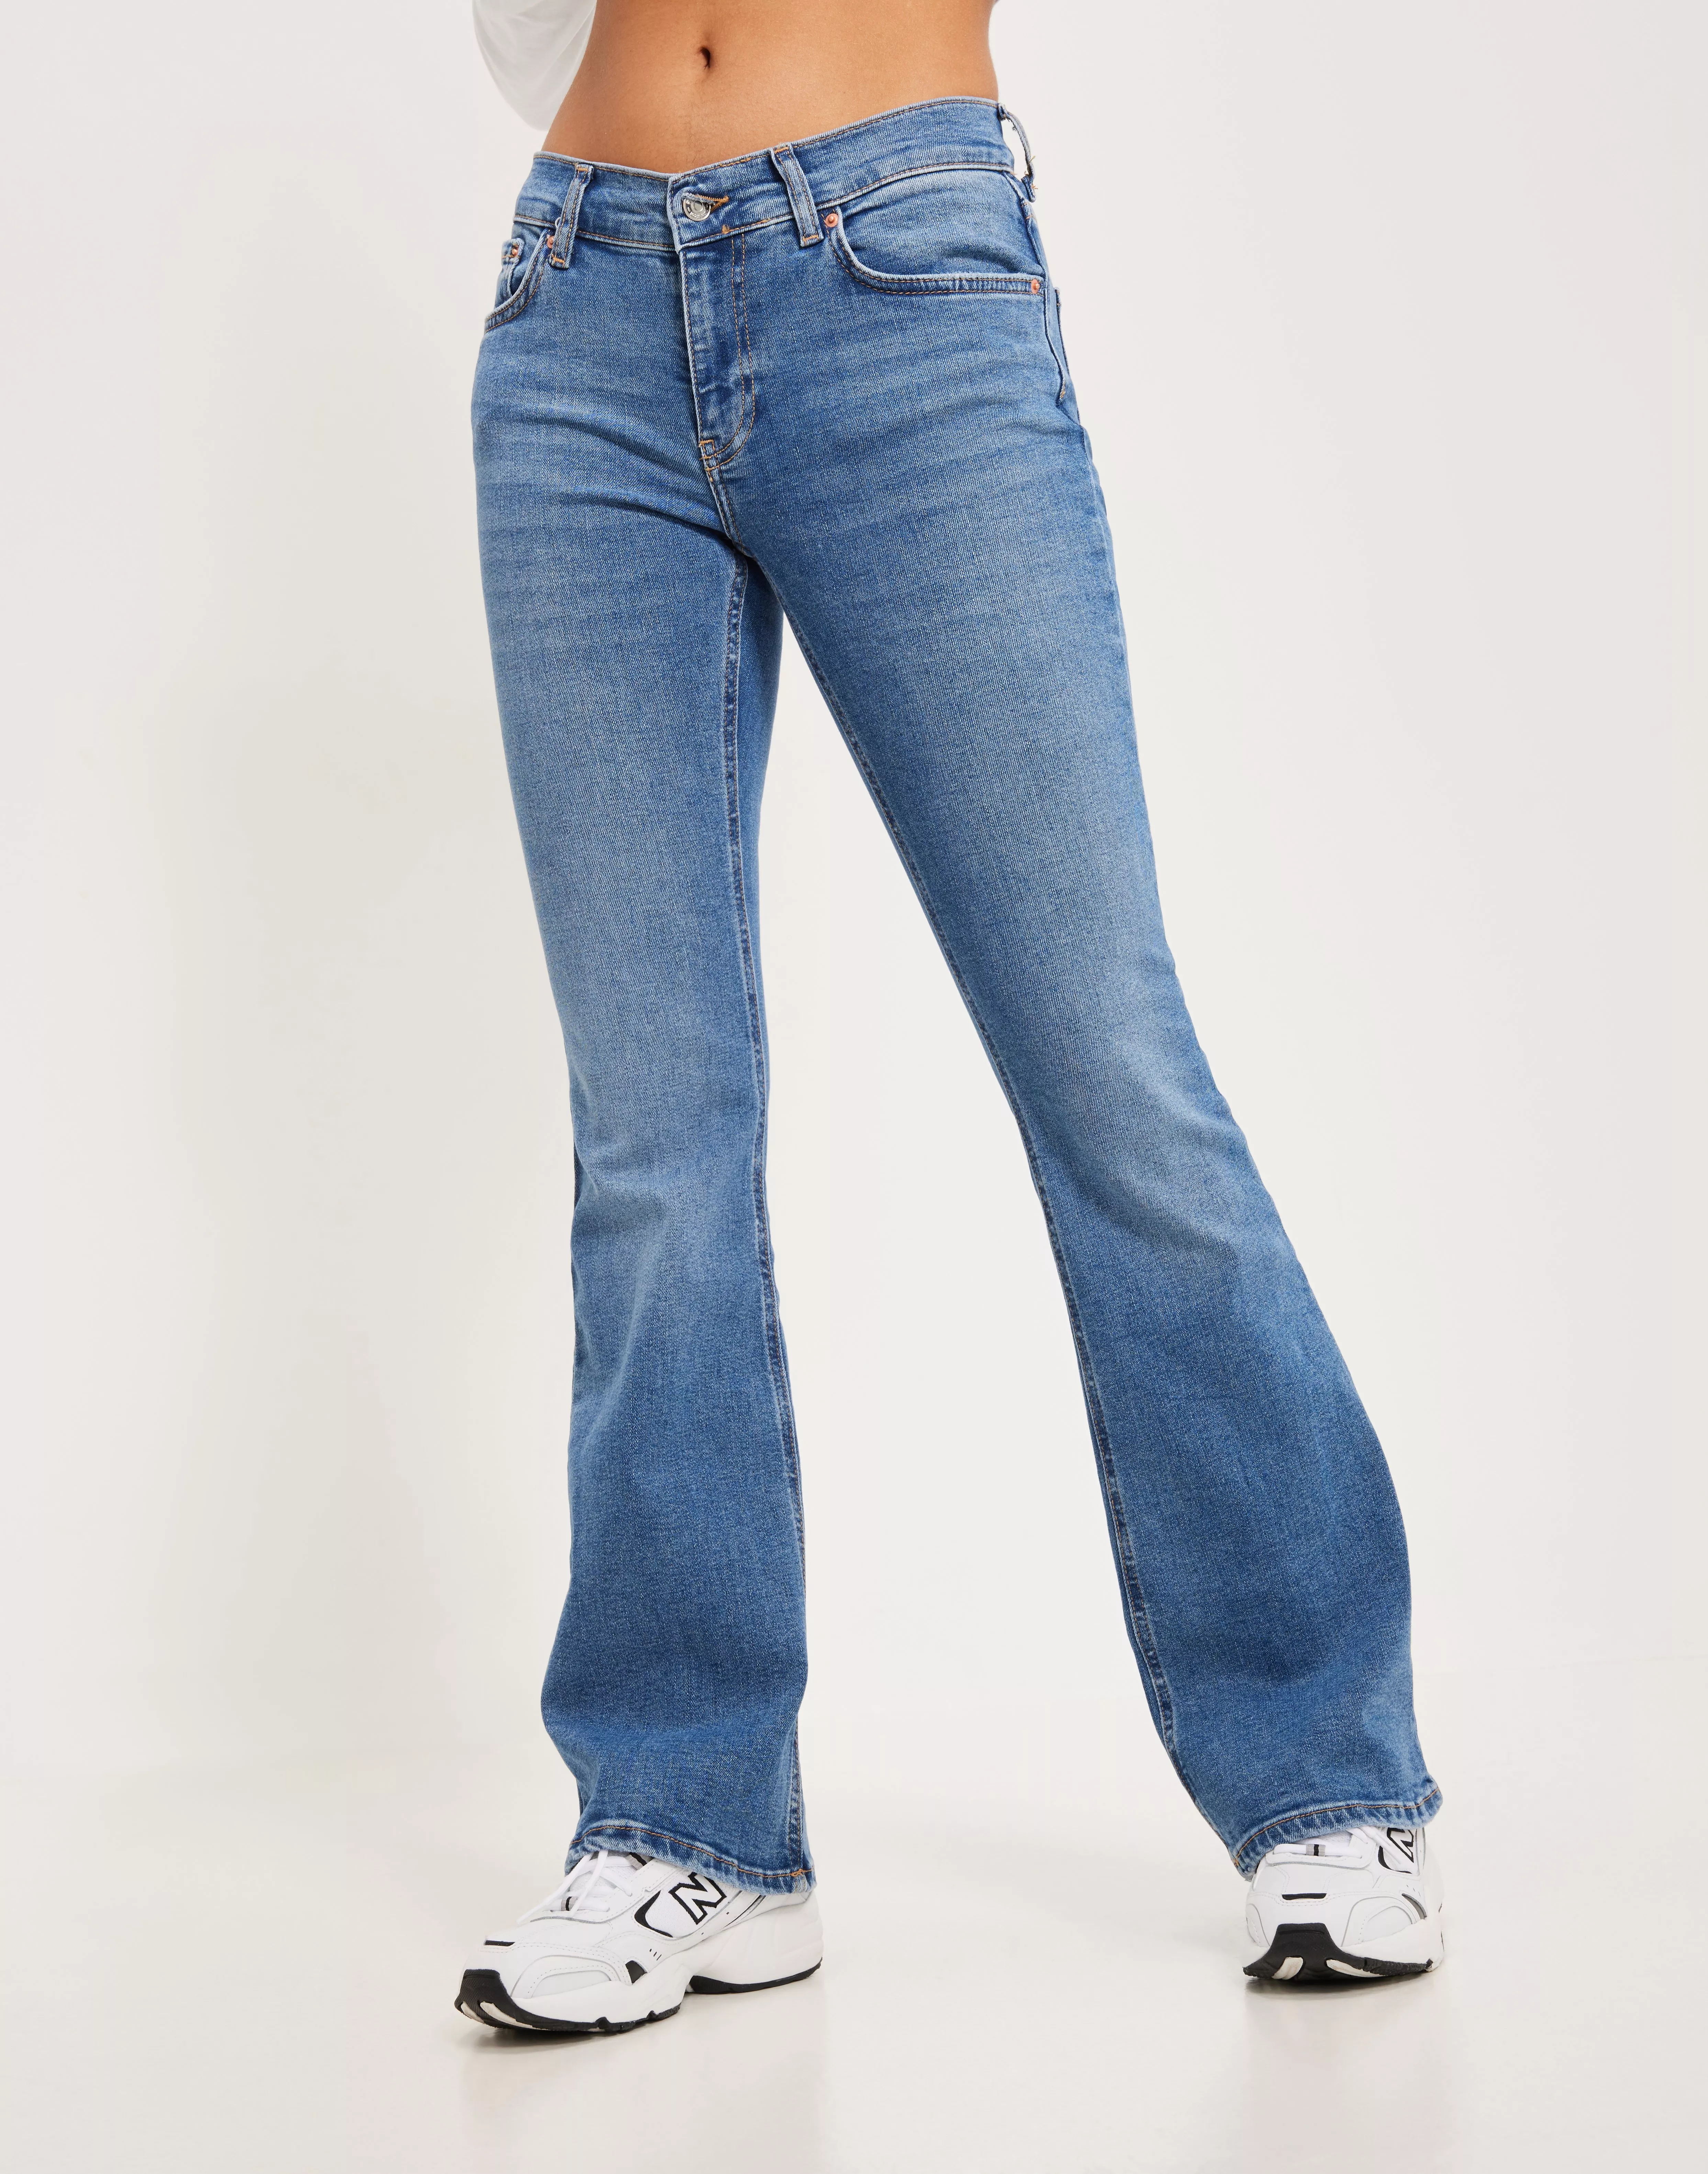 Low Rise Bootcut Jeans CF315  Low rise bootcut jeans, Low rise